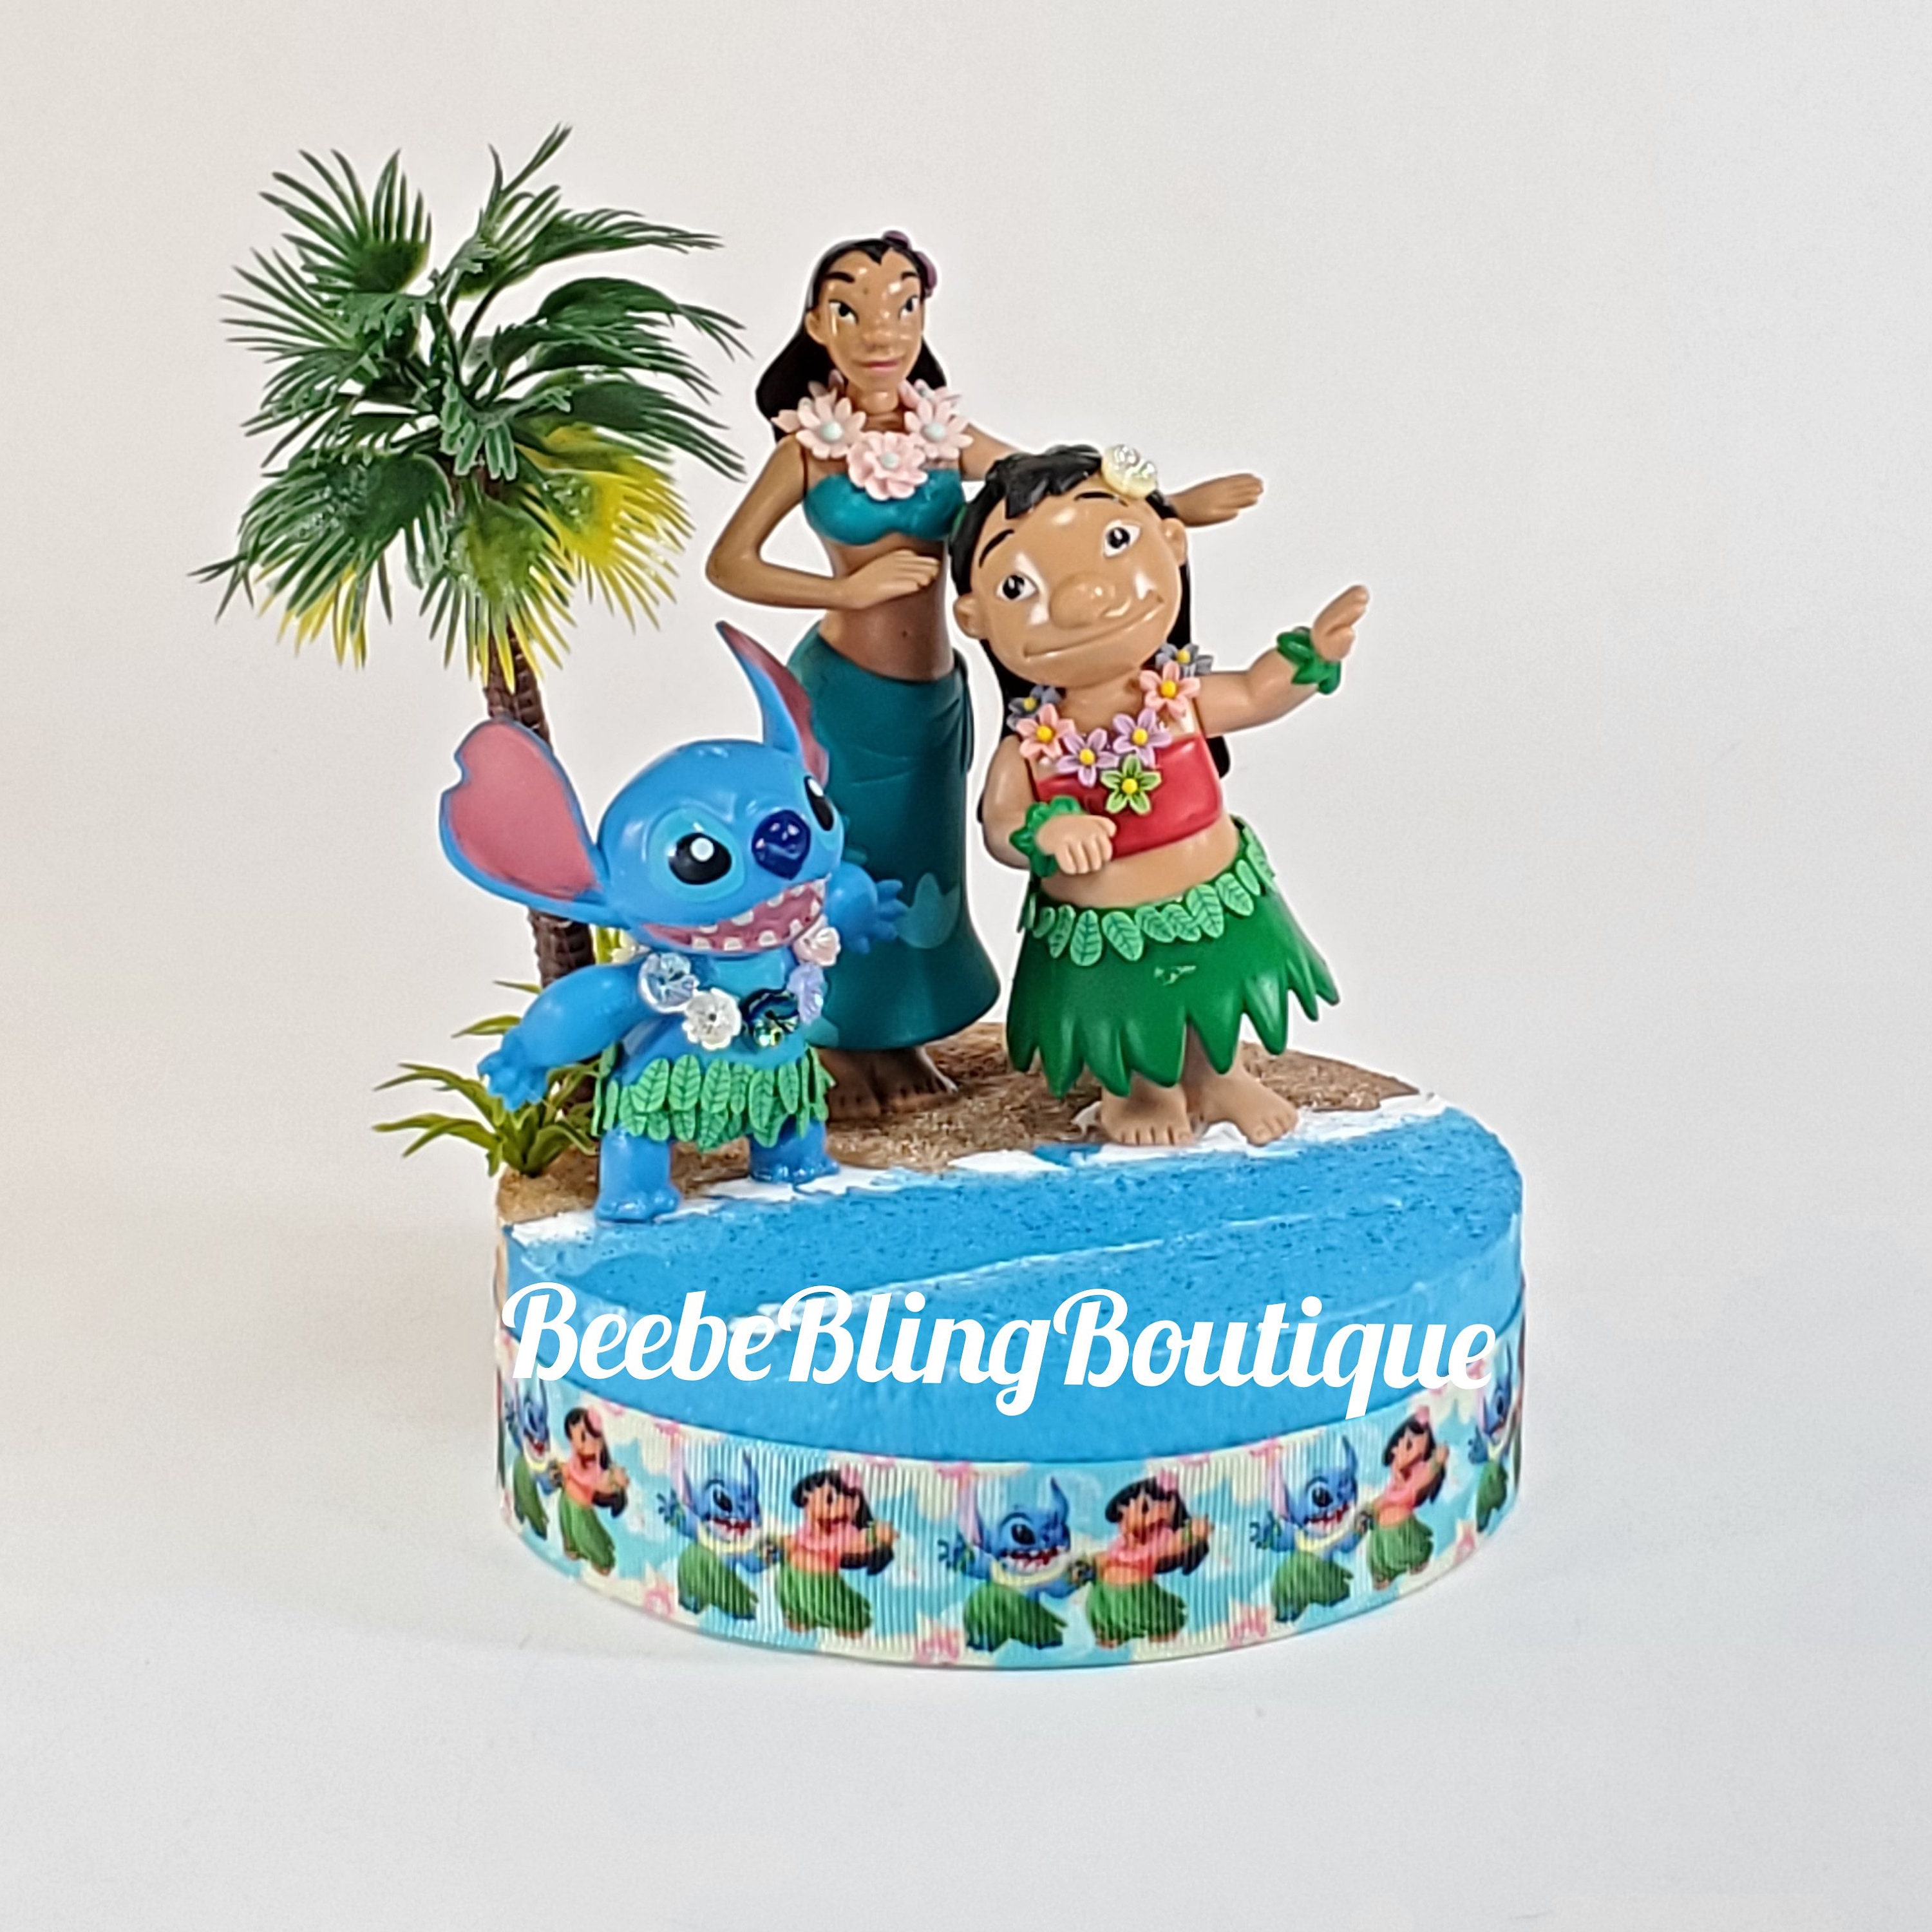 Disney Lilo and Stitch Cake topper for a very lucky birthday girl. We